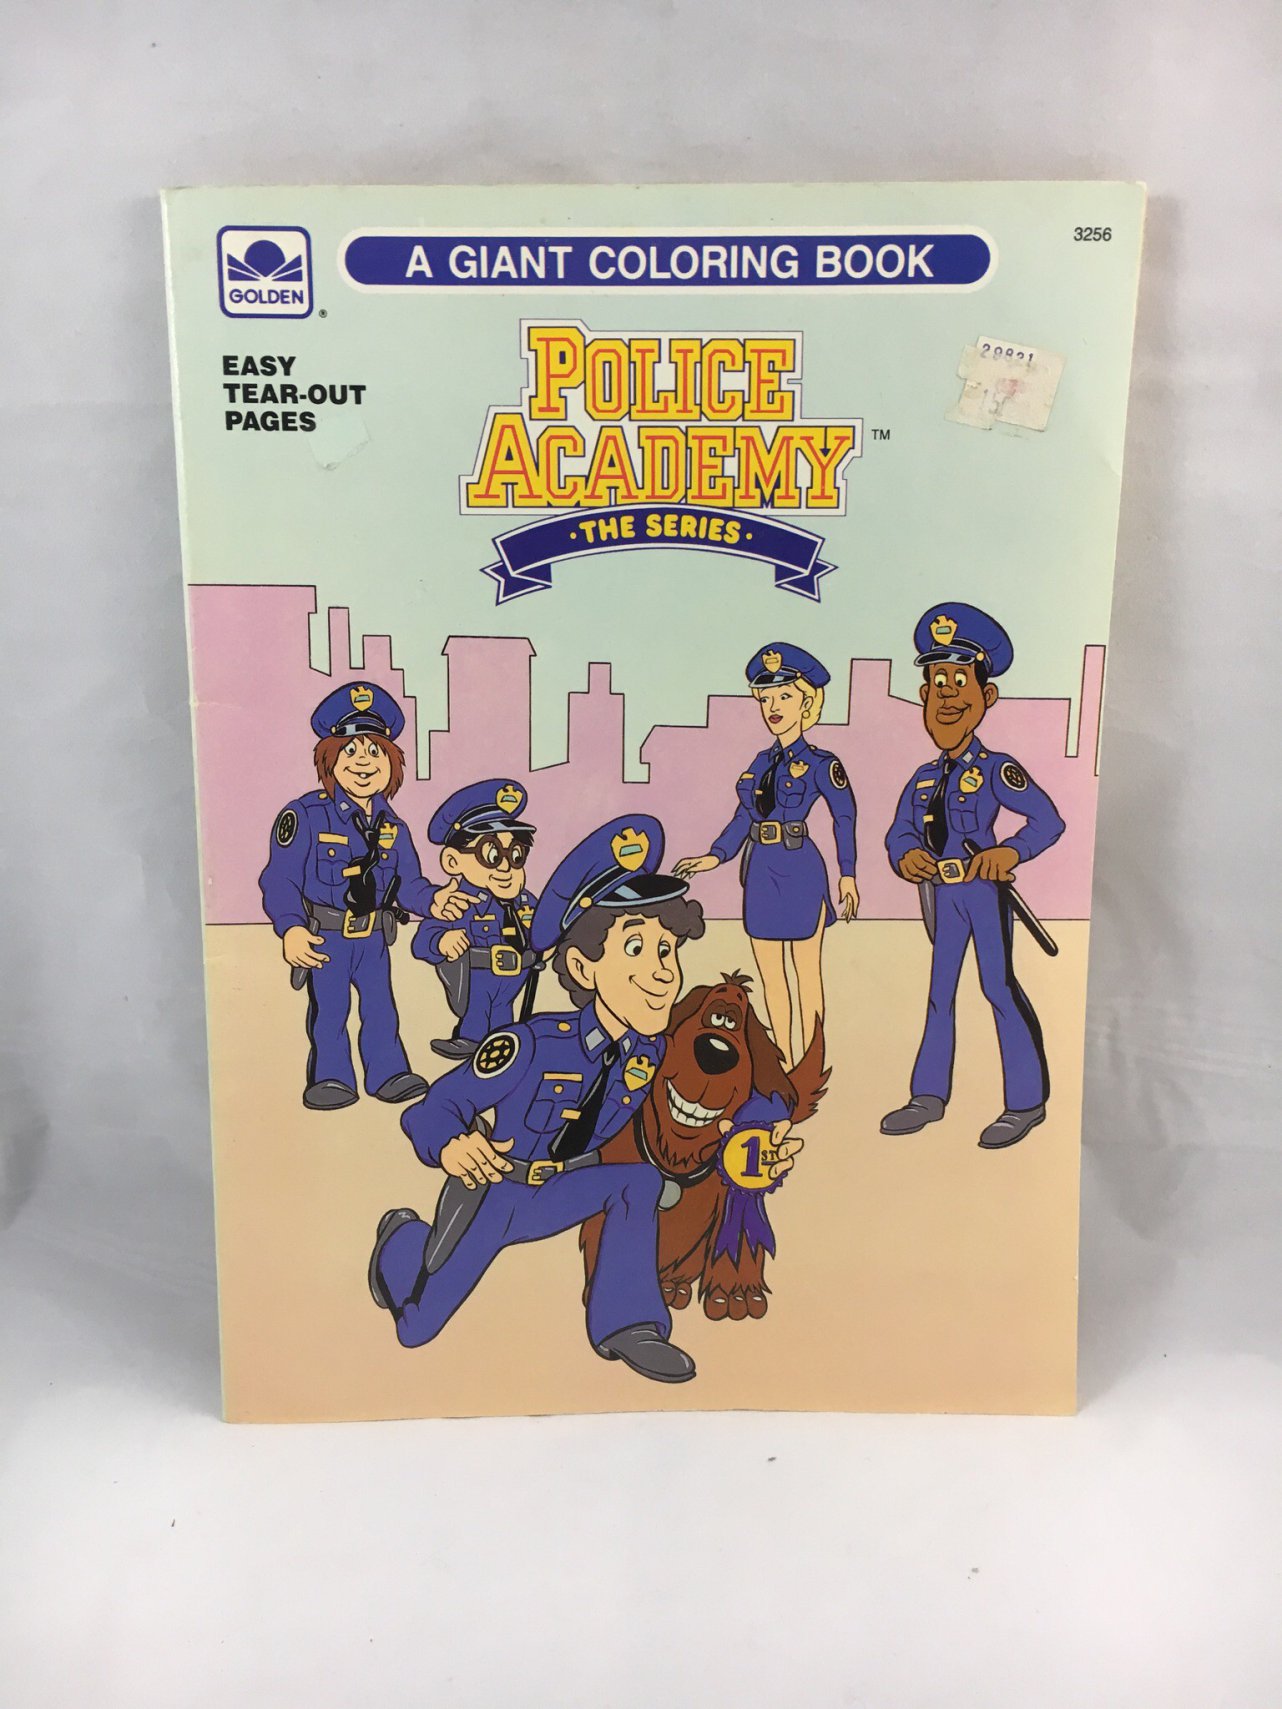 thrift store cartoon - 3256 A Giant Coloring Book Golden 2021 e out Easy TearOut Pages Police A Ademy . The Series